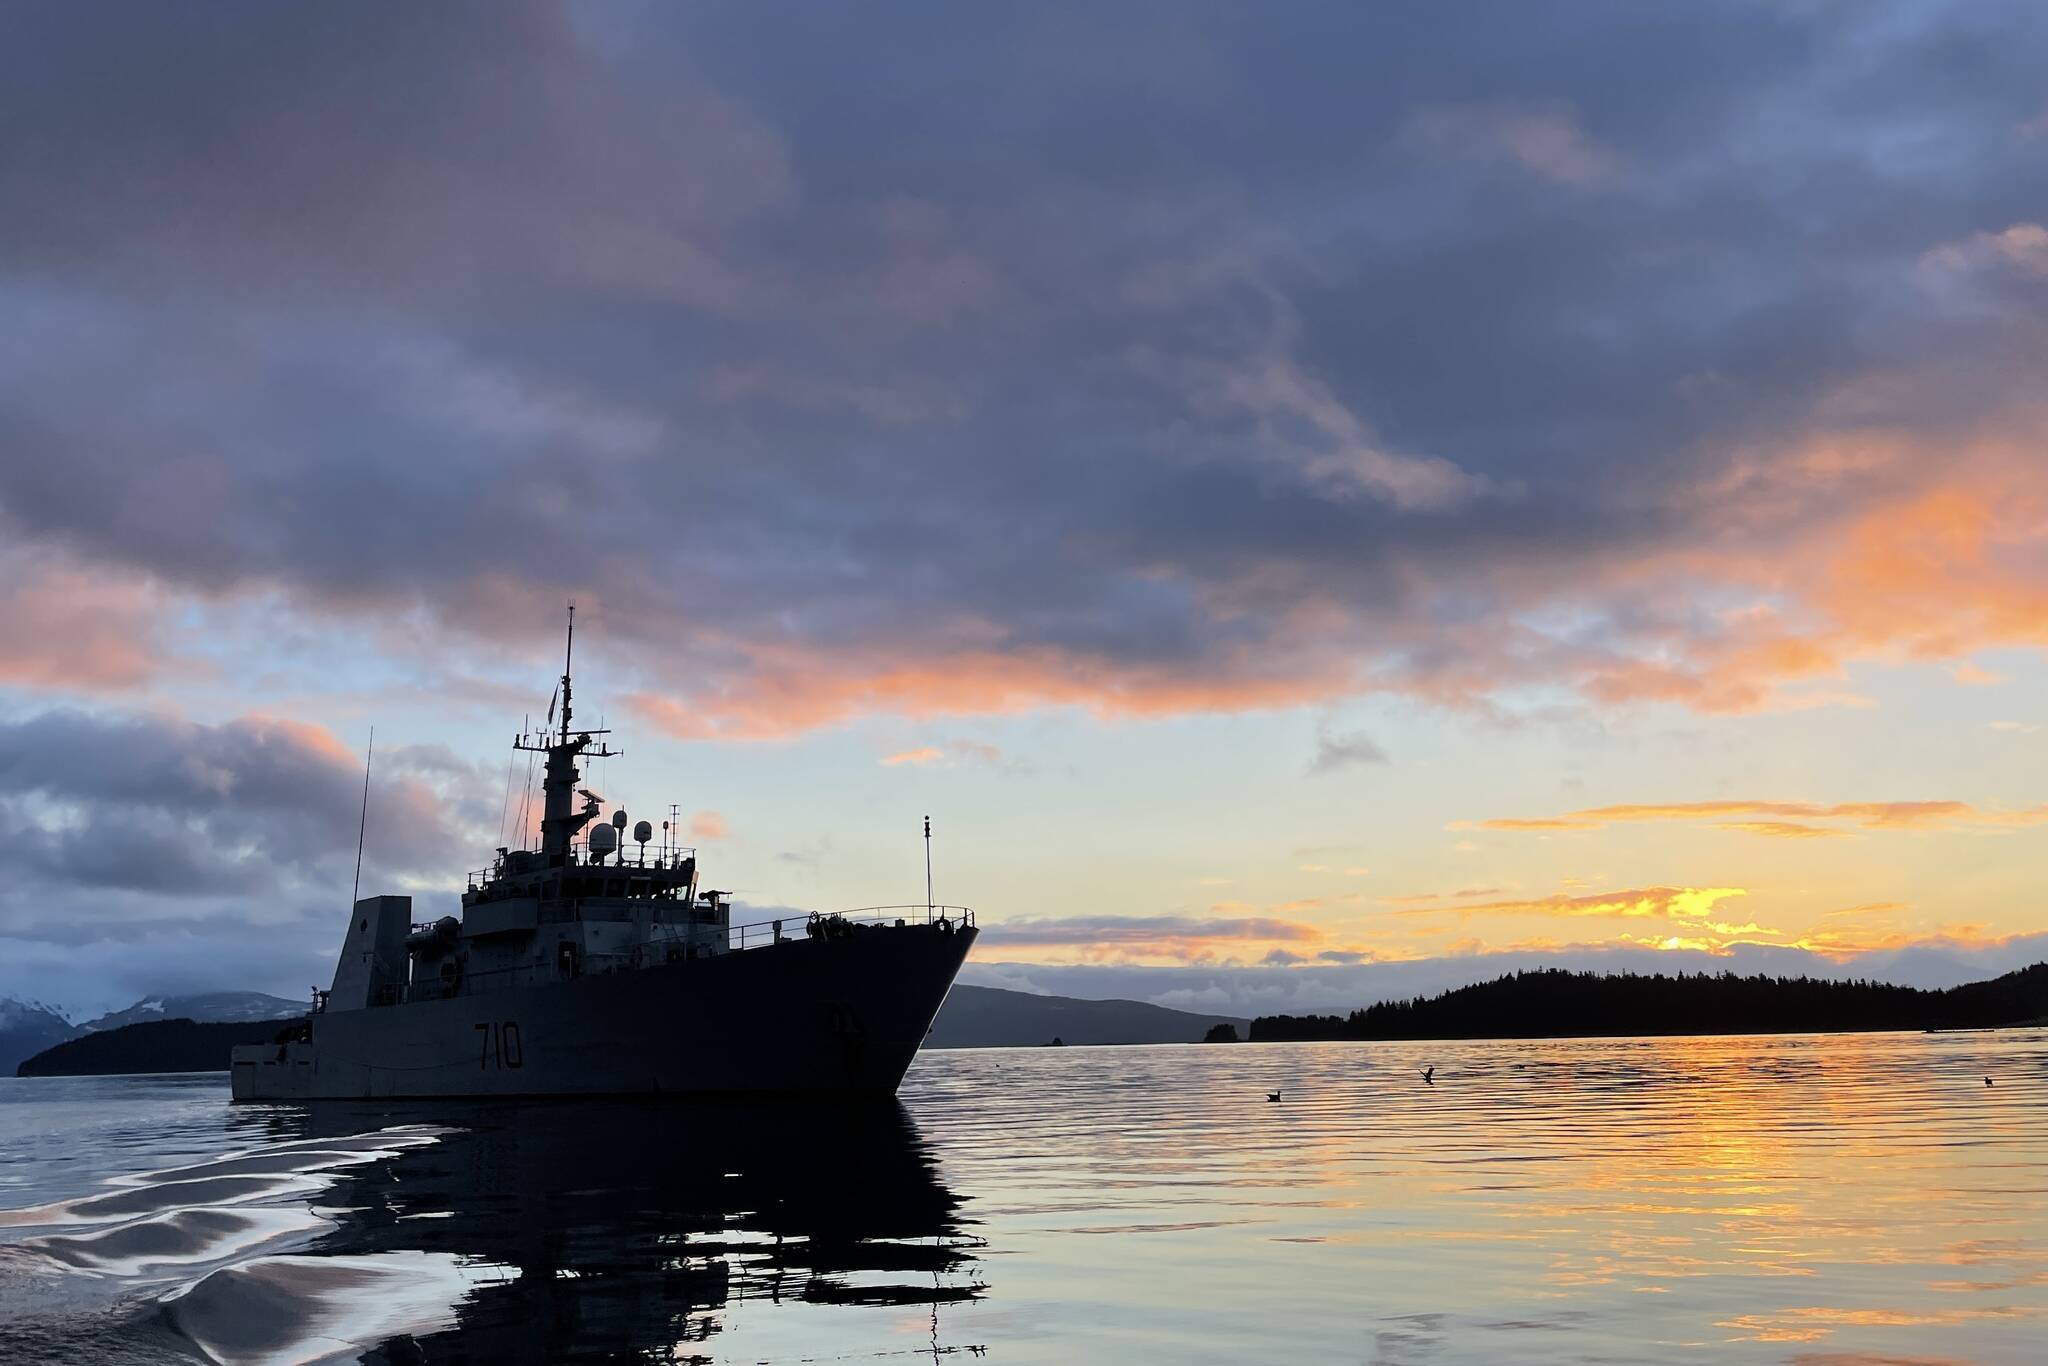 Her Majesty’s Canadian Ship Brandon sits off Auke Bay after offloading passengers on March 6, 2022, as part of exercise Arctic Edge 2022. (Michael S. Lockett / Juneau Empire)